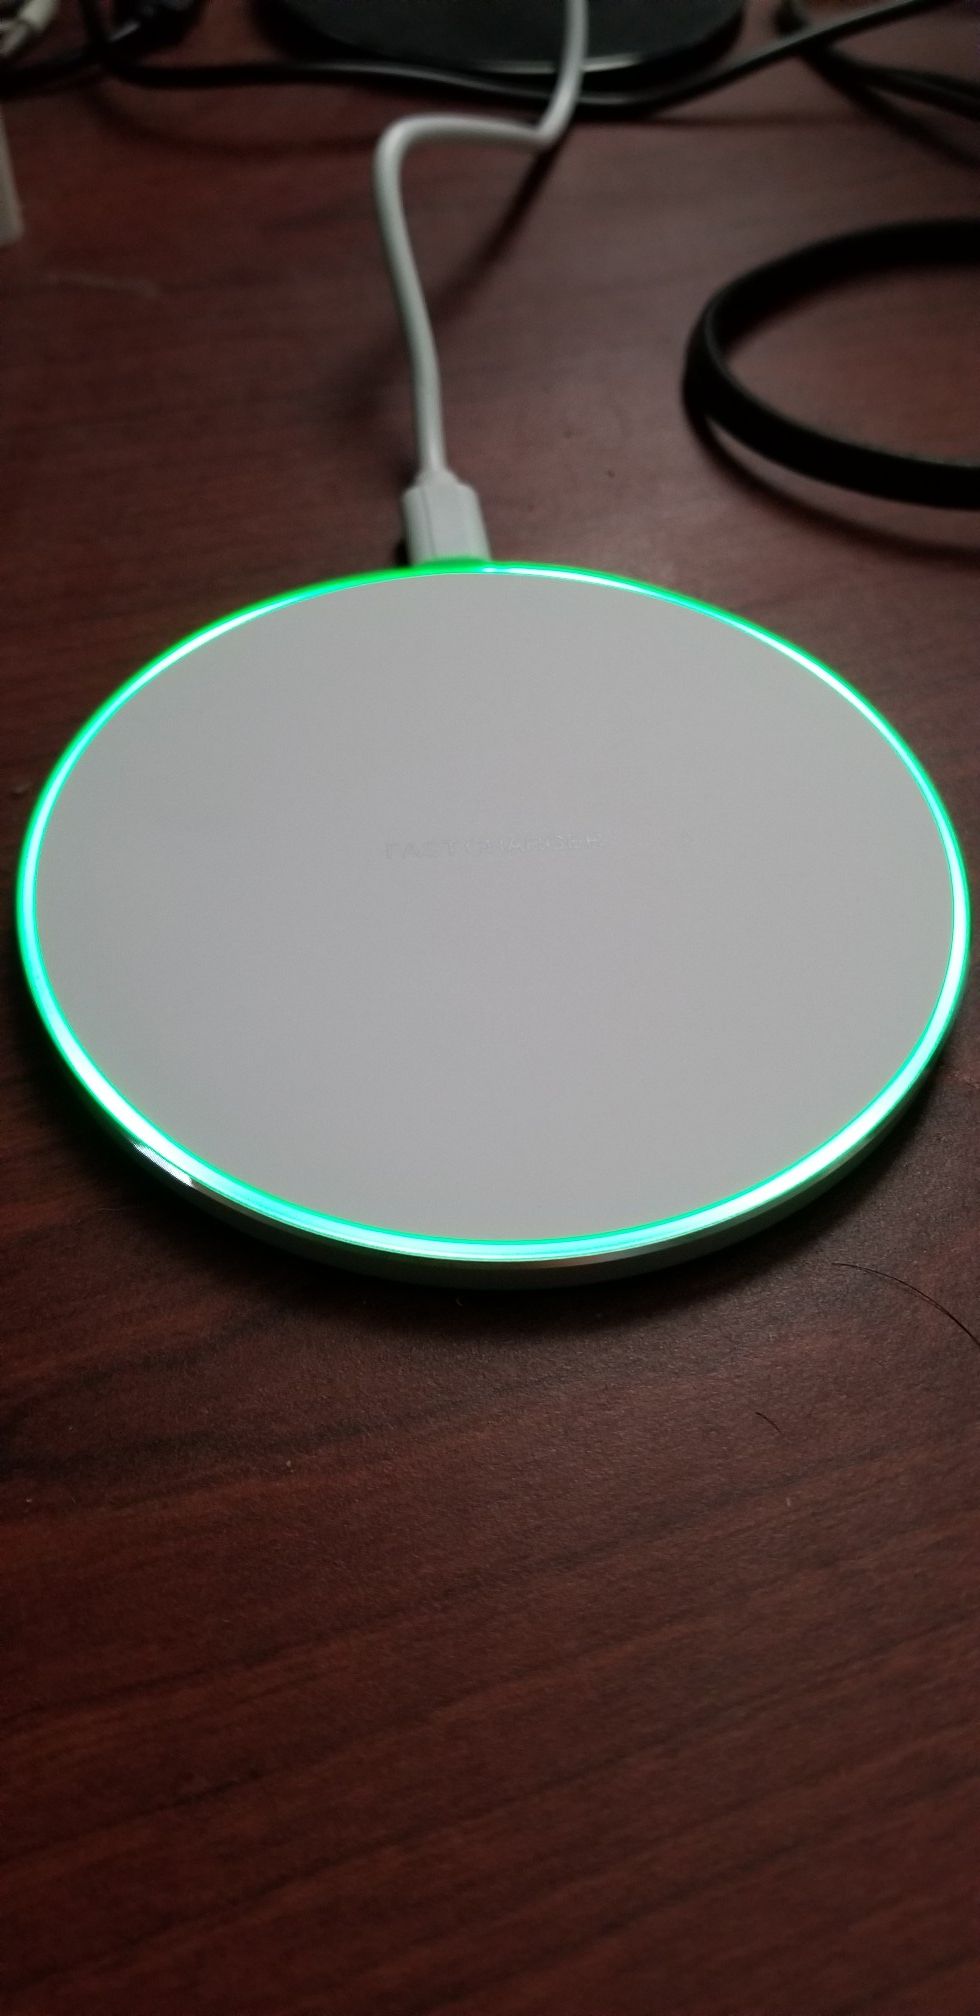 Wireless charger for smartphones